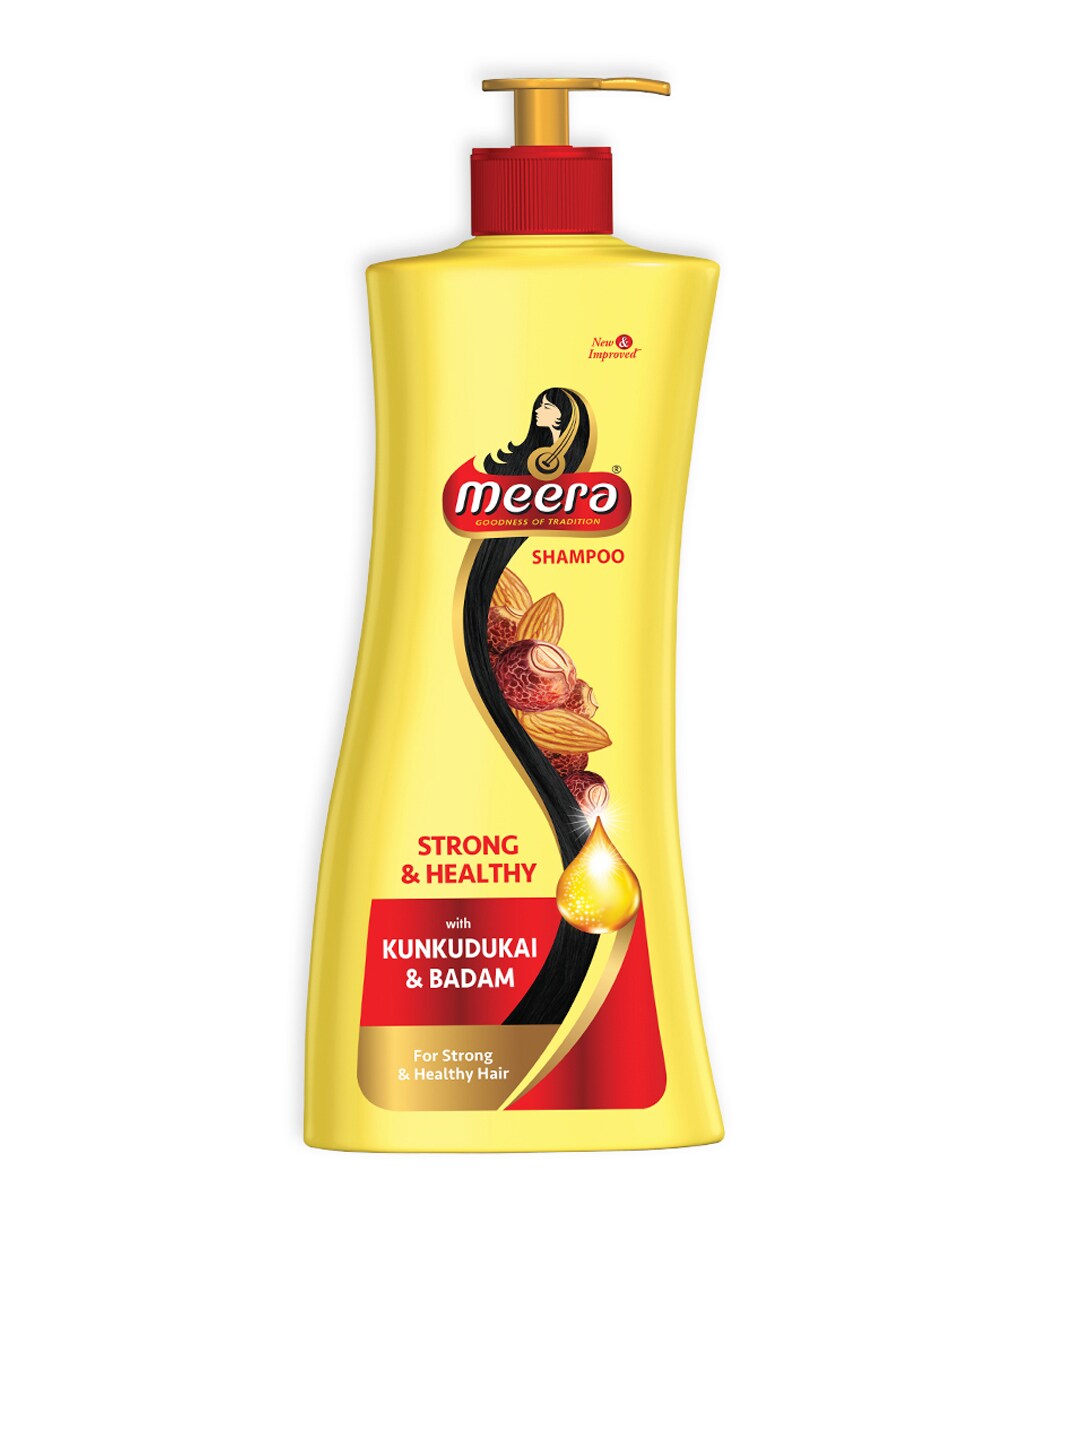 Meera GOODNESS OF TRADITION Strong & Healthy Shampoo with Kunkudukai and Badam 650ml Price in India